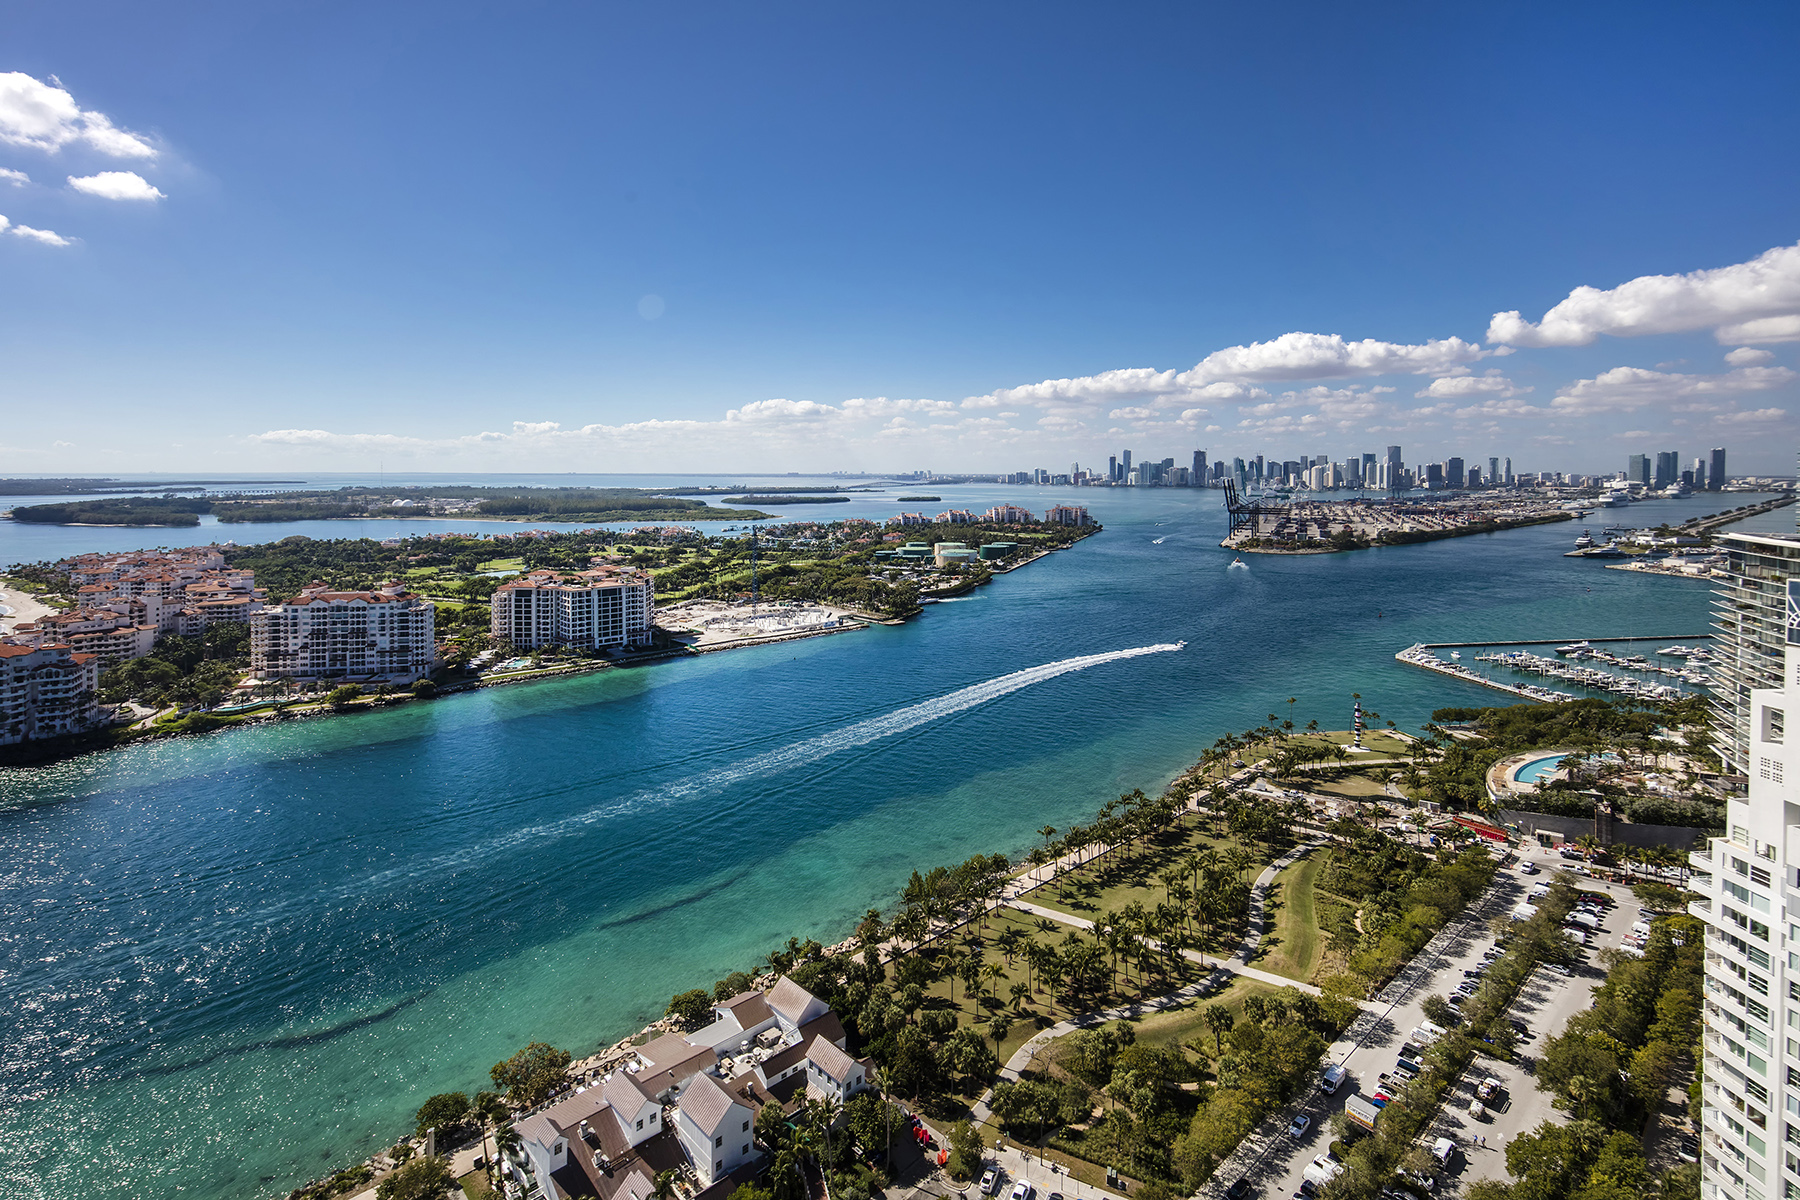 The bay view from Unit 3303 at the Continuum in Miami Beach